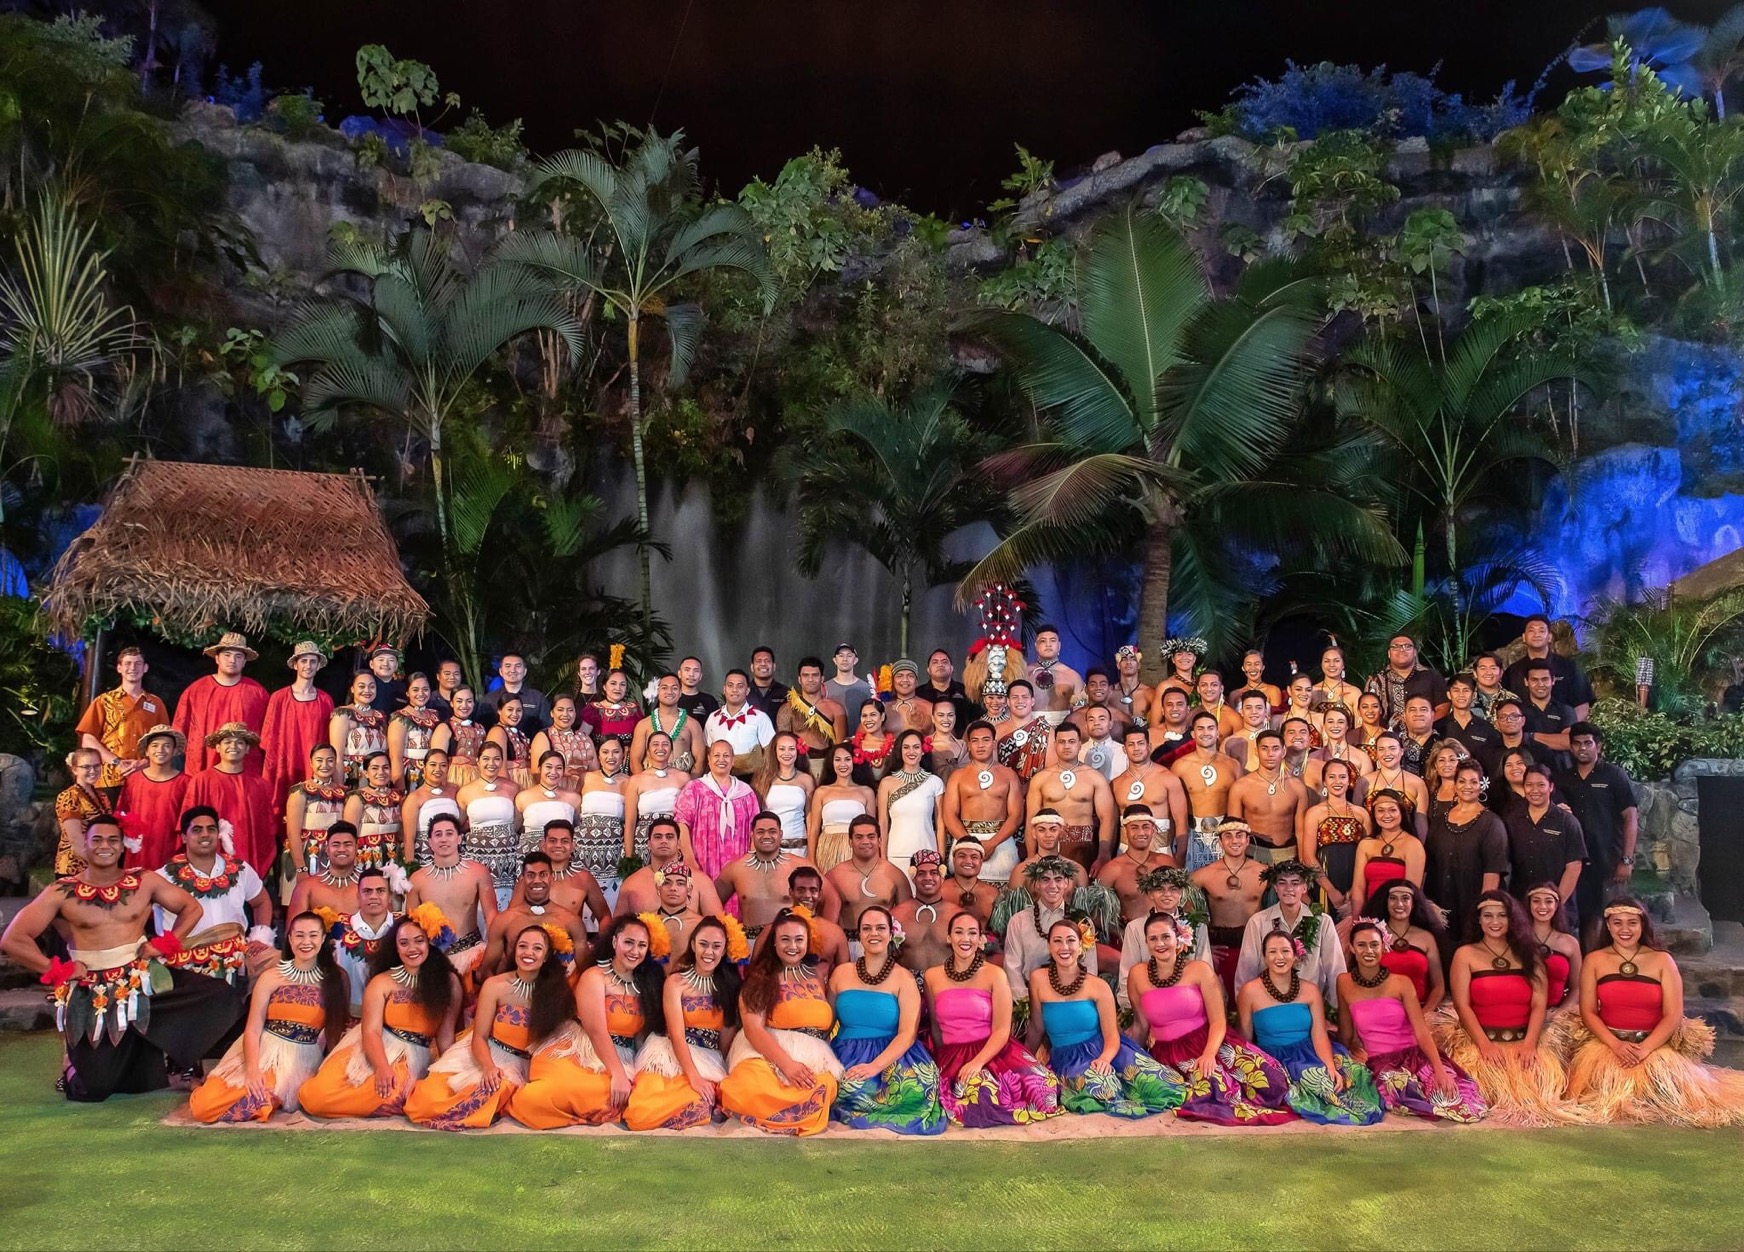 Celebrate the spirit of diversity here at the Polynesian Cultural Center